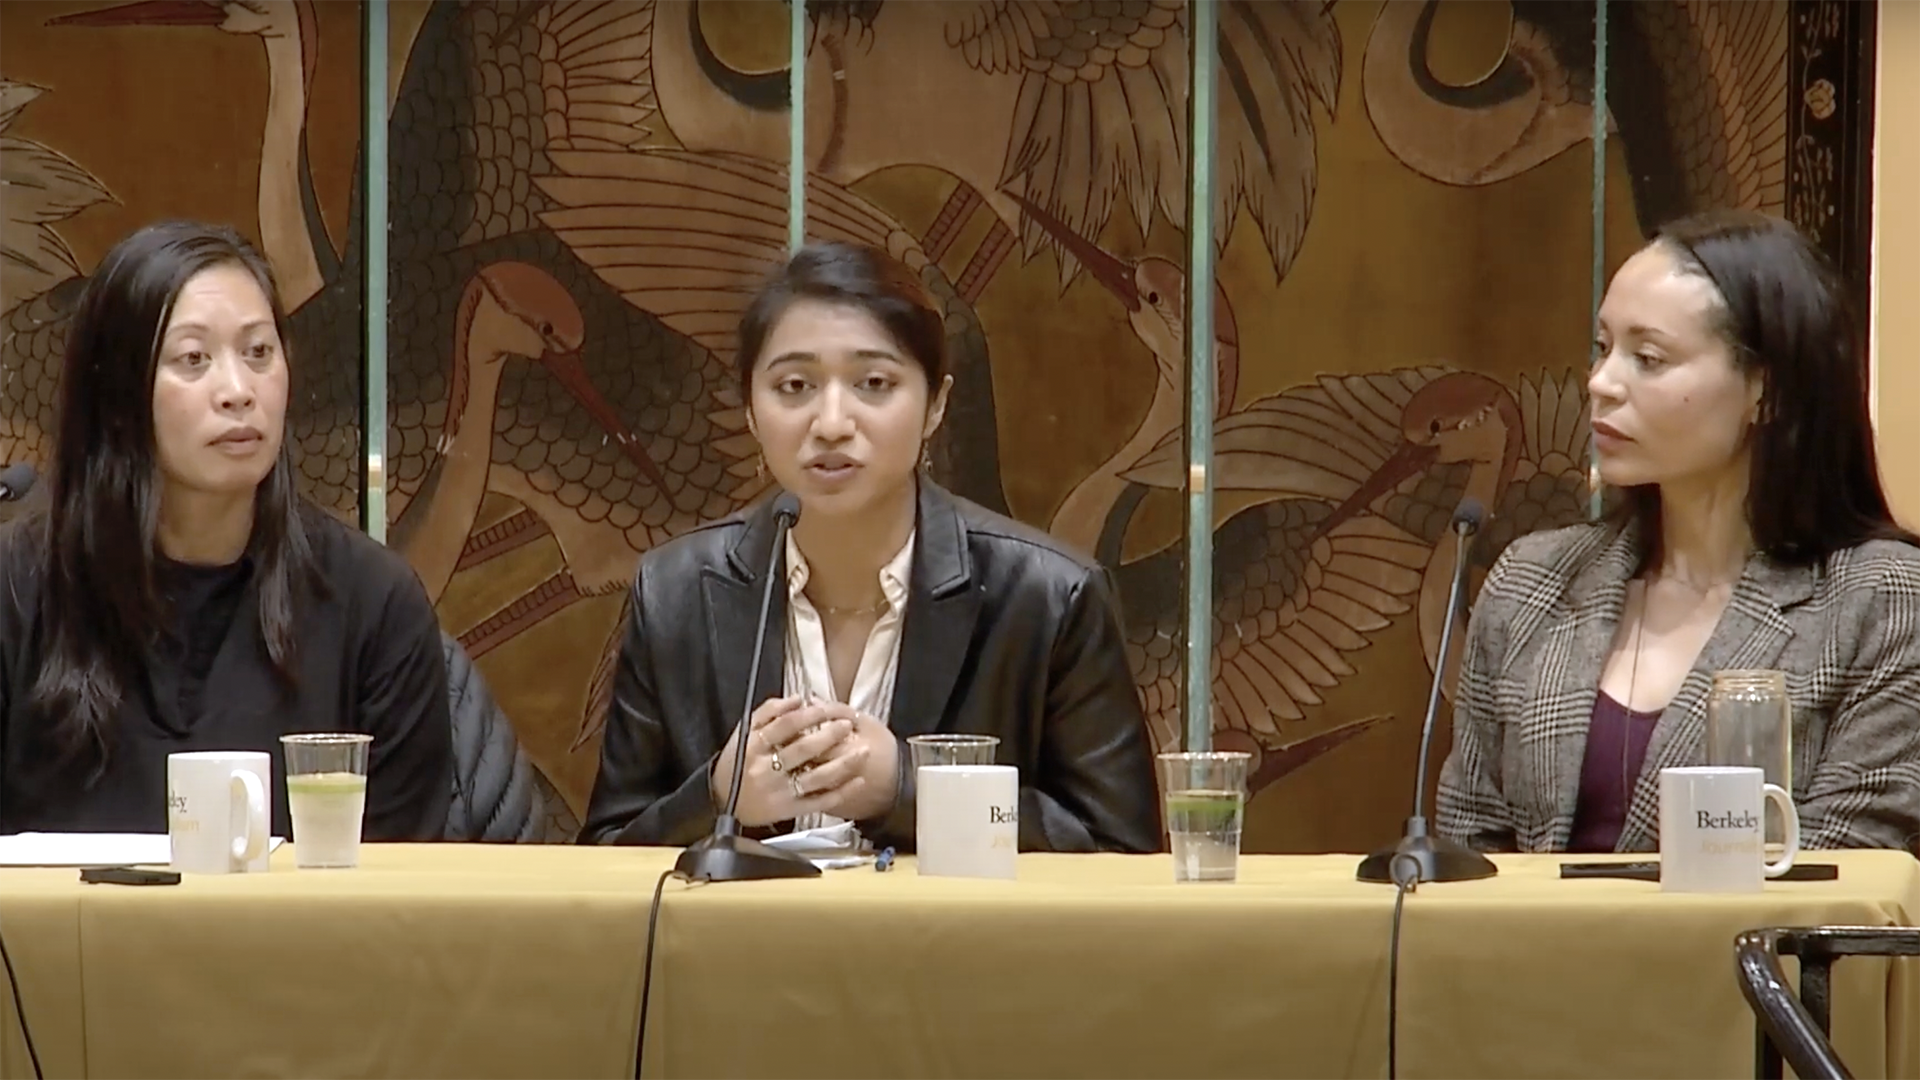 Bernice Yeung, Isabella Gomes and Holly Joshi sit at a long table with microphones in front of them